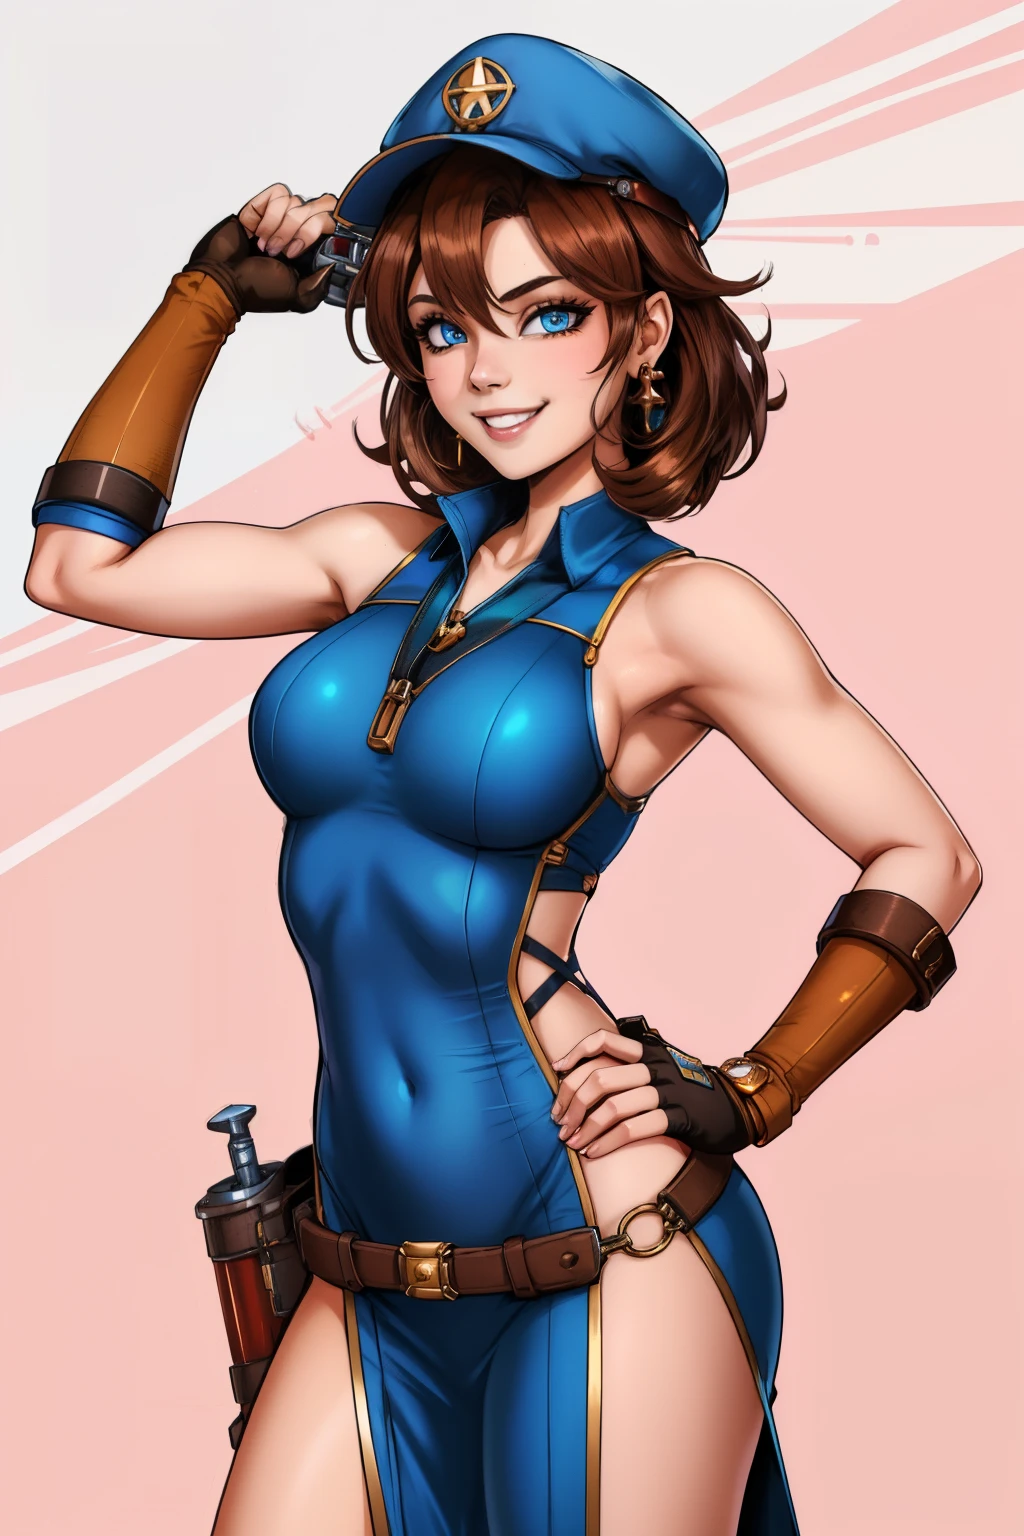 1girl in a revealing outfit, a long sleeveless side slit tunic, engineer with a cute cap and short brown hair, smile, kawaii tooth, in a pose looking at viewever with a wrench gripped in her right hand and the other on her hip, fantasy engineer, blue eyes, bending forward